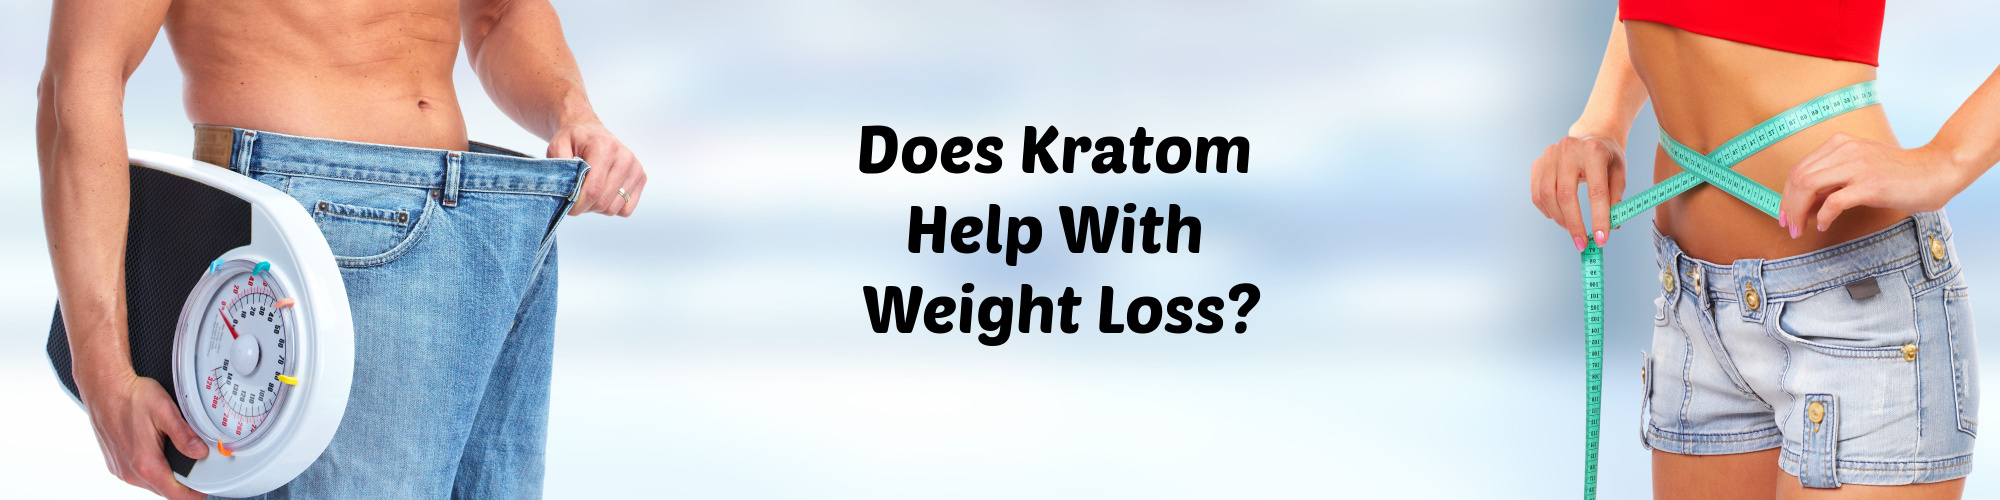 Kratom Weight Loss Benefits: Does It Really Work?